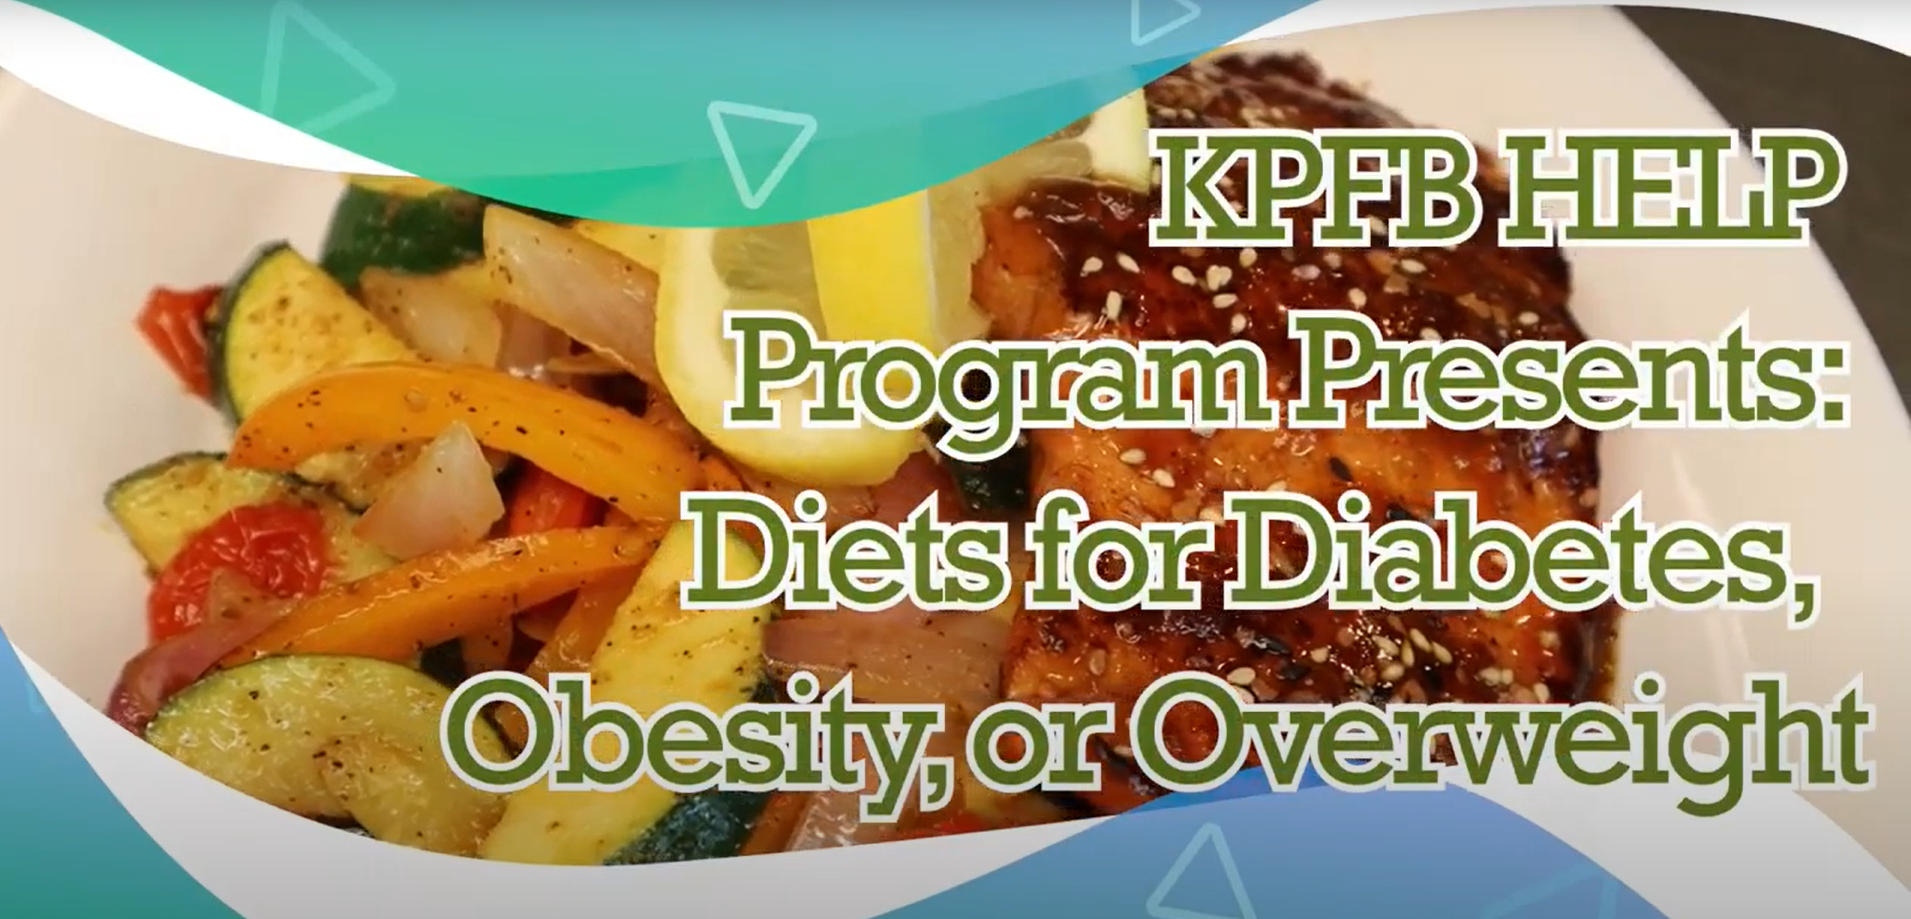 HELP - Diets for Diabetes, Obesity or Overweight